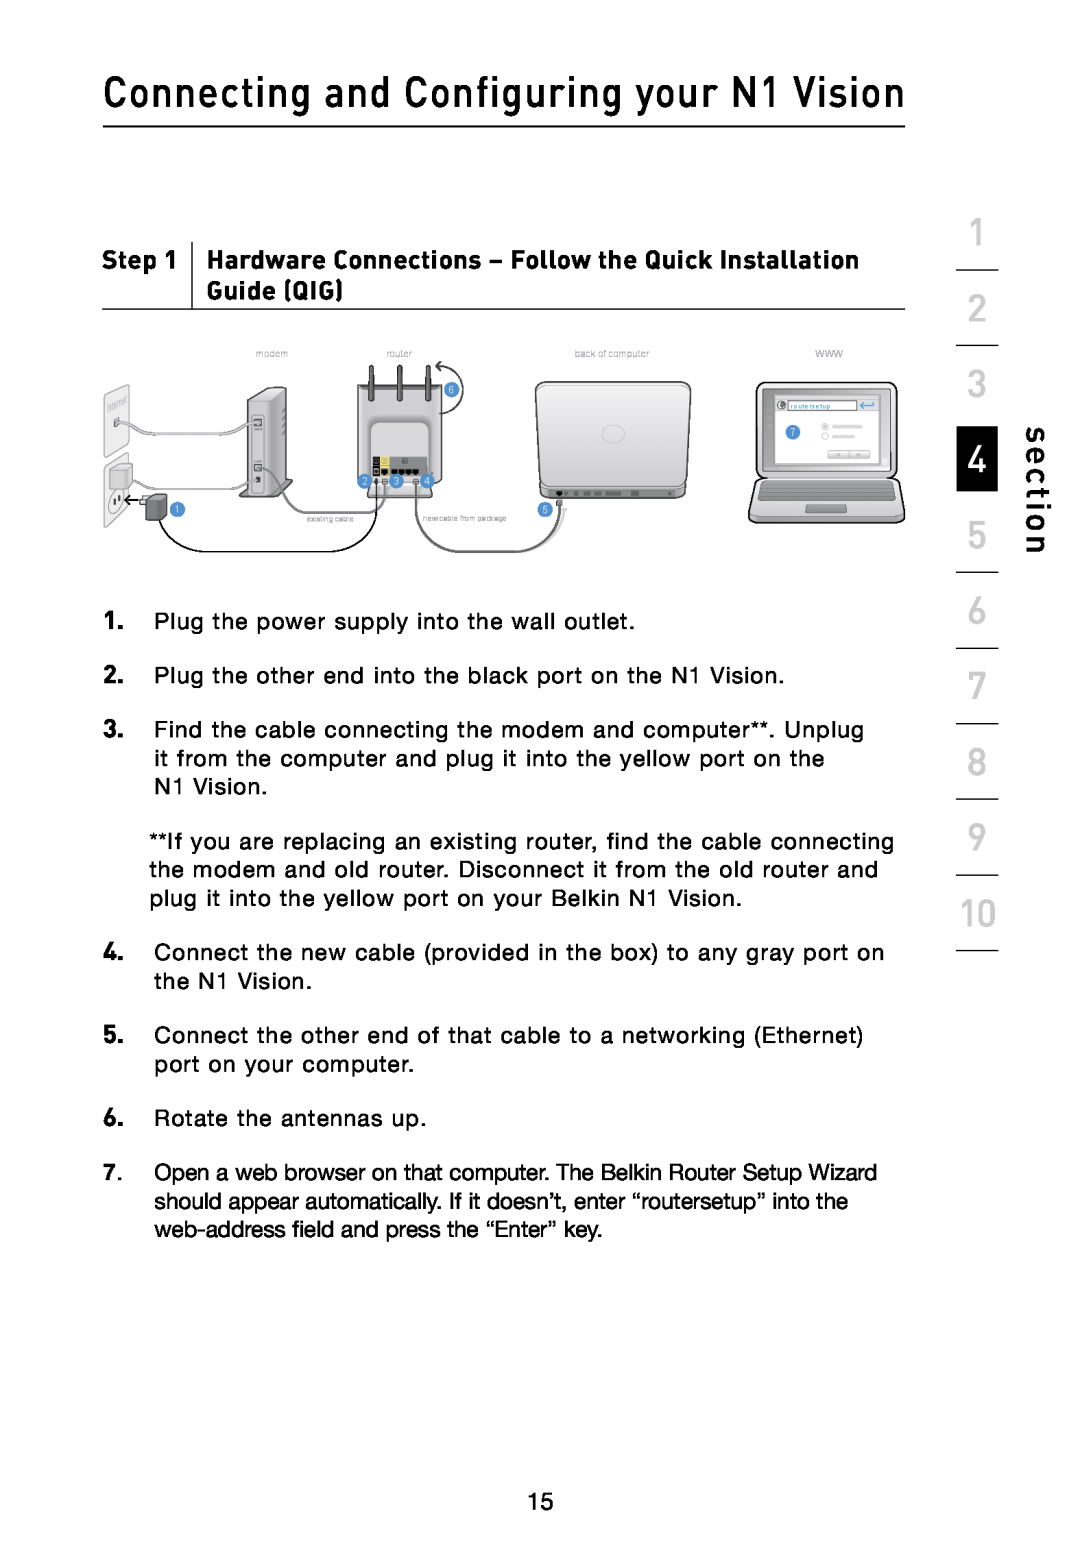 Belkin Hardware Connections - Follow the Quick Installation Guide QIG, Connecting and Configuring your N1 Vision 